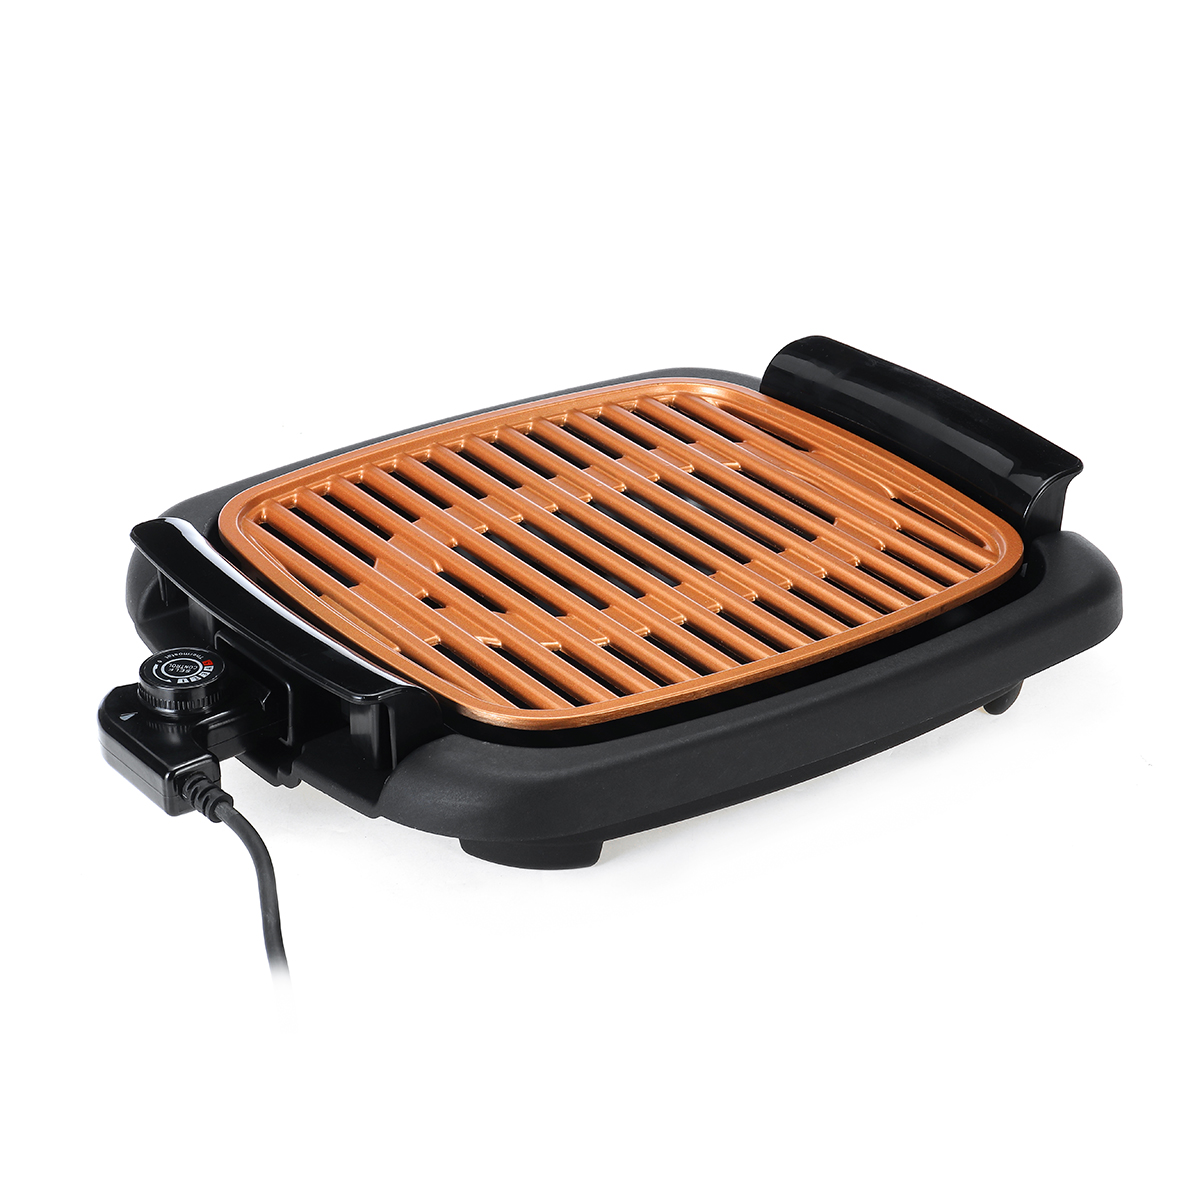 Smokeless-Electric-Roast-BBQ-Grill-Indoor-Grill-Nonstick-Pan--Portable-Outdoor-Barbecue-Grill-1628470-6